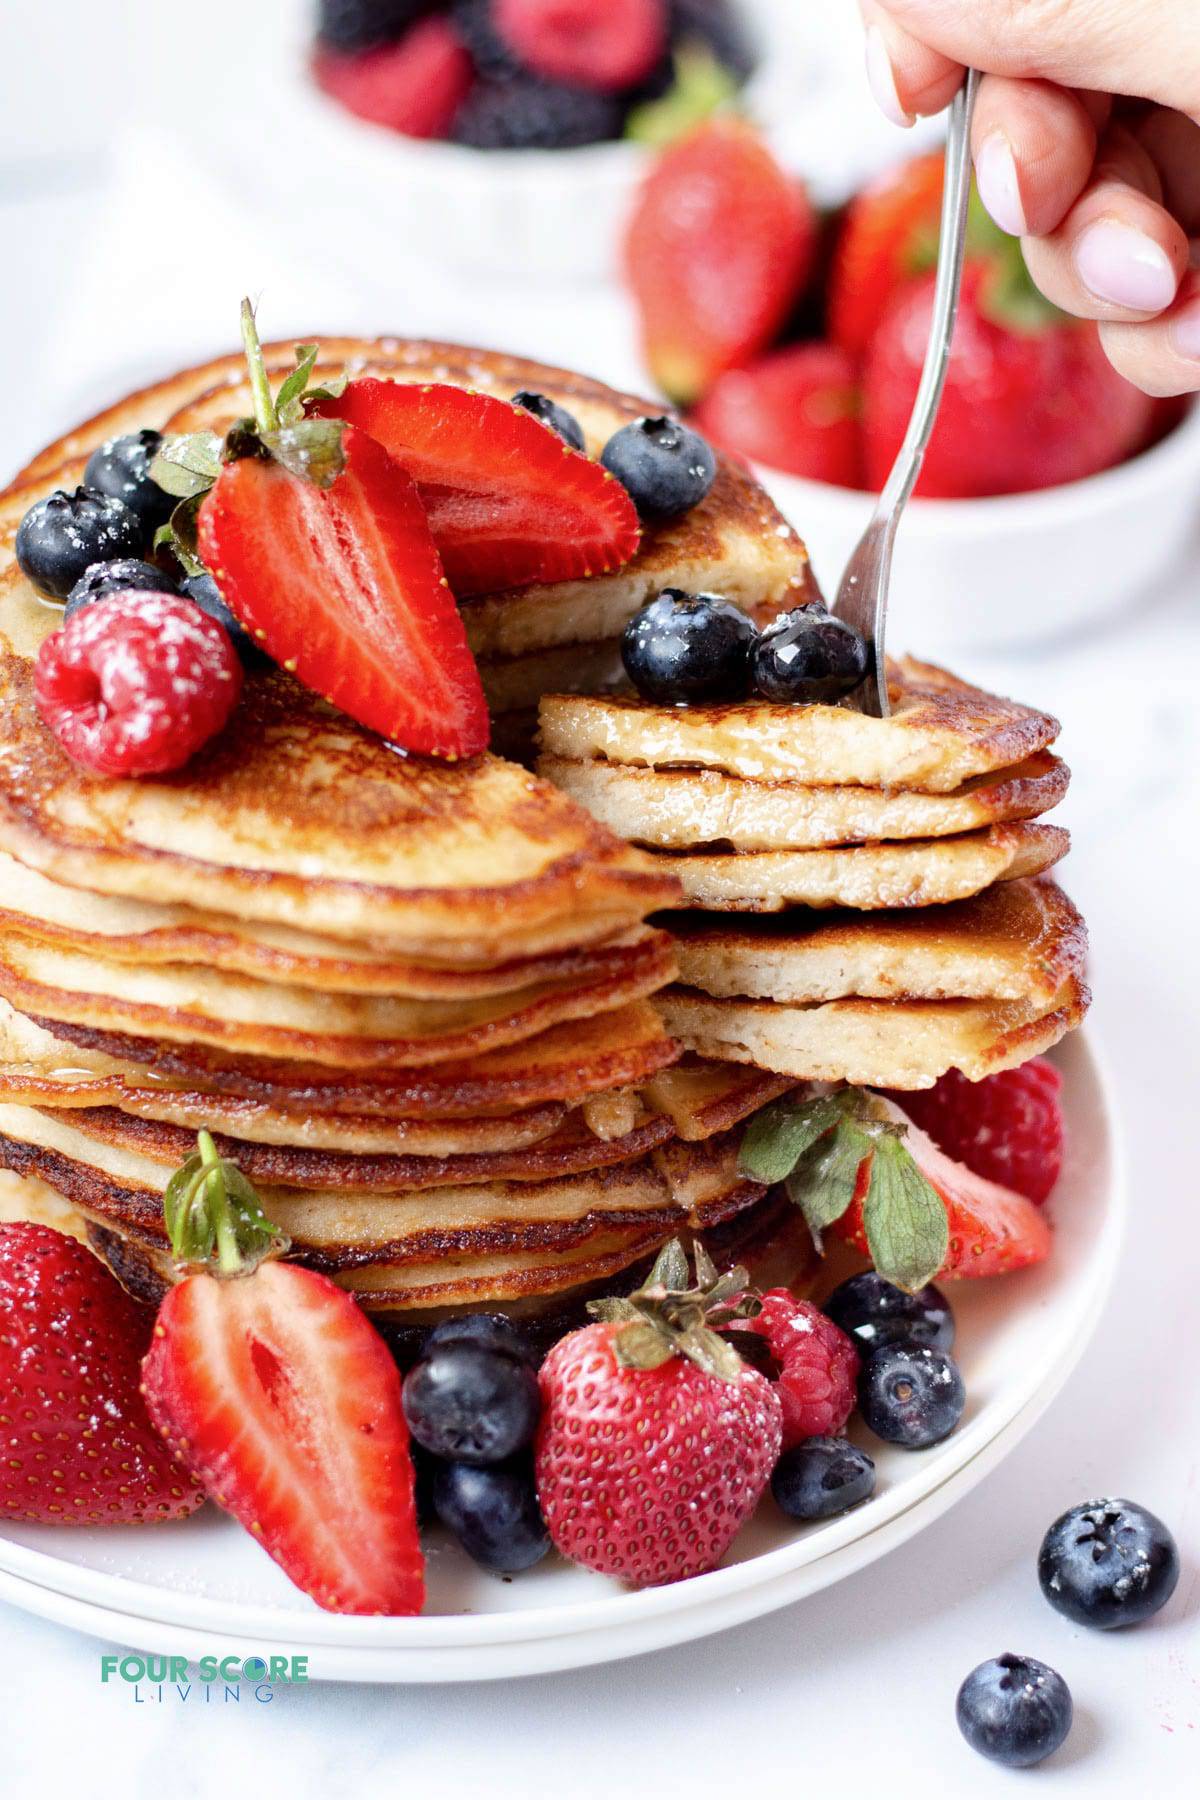 a tall stack of pancakes garnished with fresh berries. A fork is picking up a large bite of pancakes with blueberries on top.